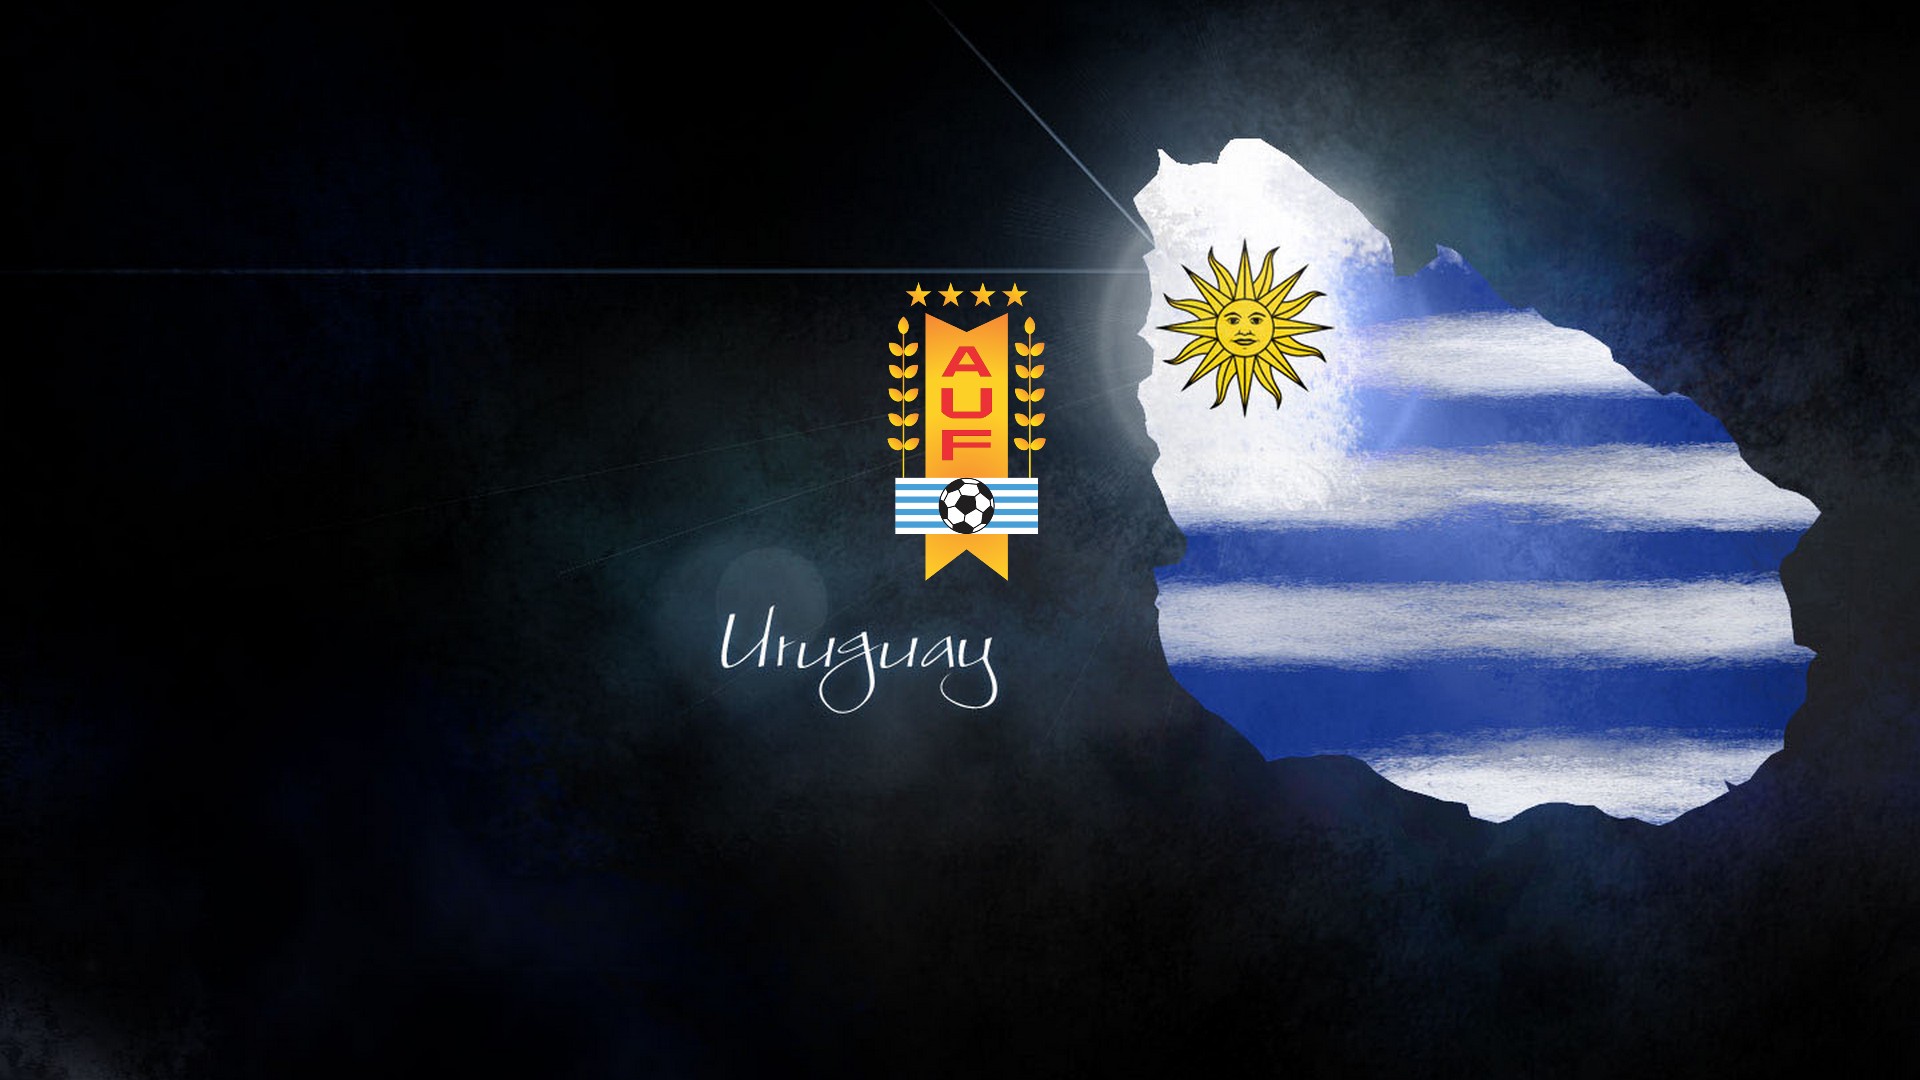 Uruguay Football Wallpaper with resolution 1920x1080 pixel. You can make this wallpaper for your Mac or Windows Desktop Background, iPhone, Android or Tablet and another Smartphone device